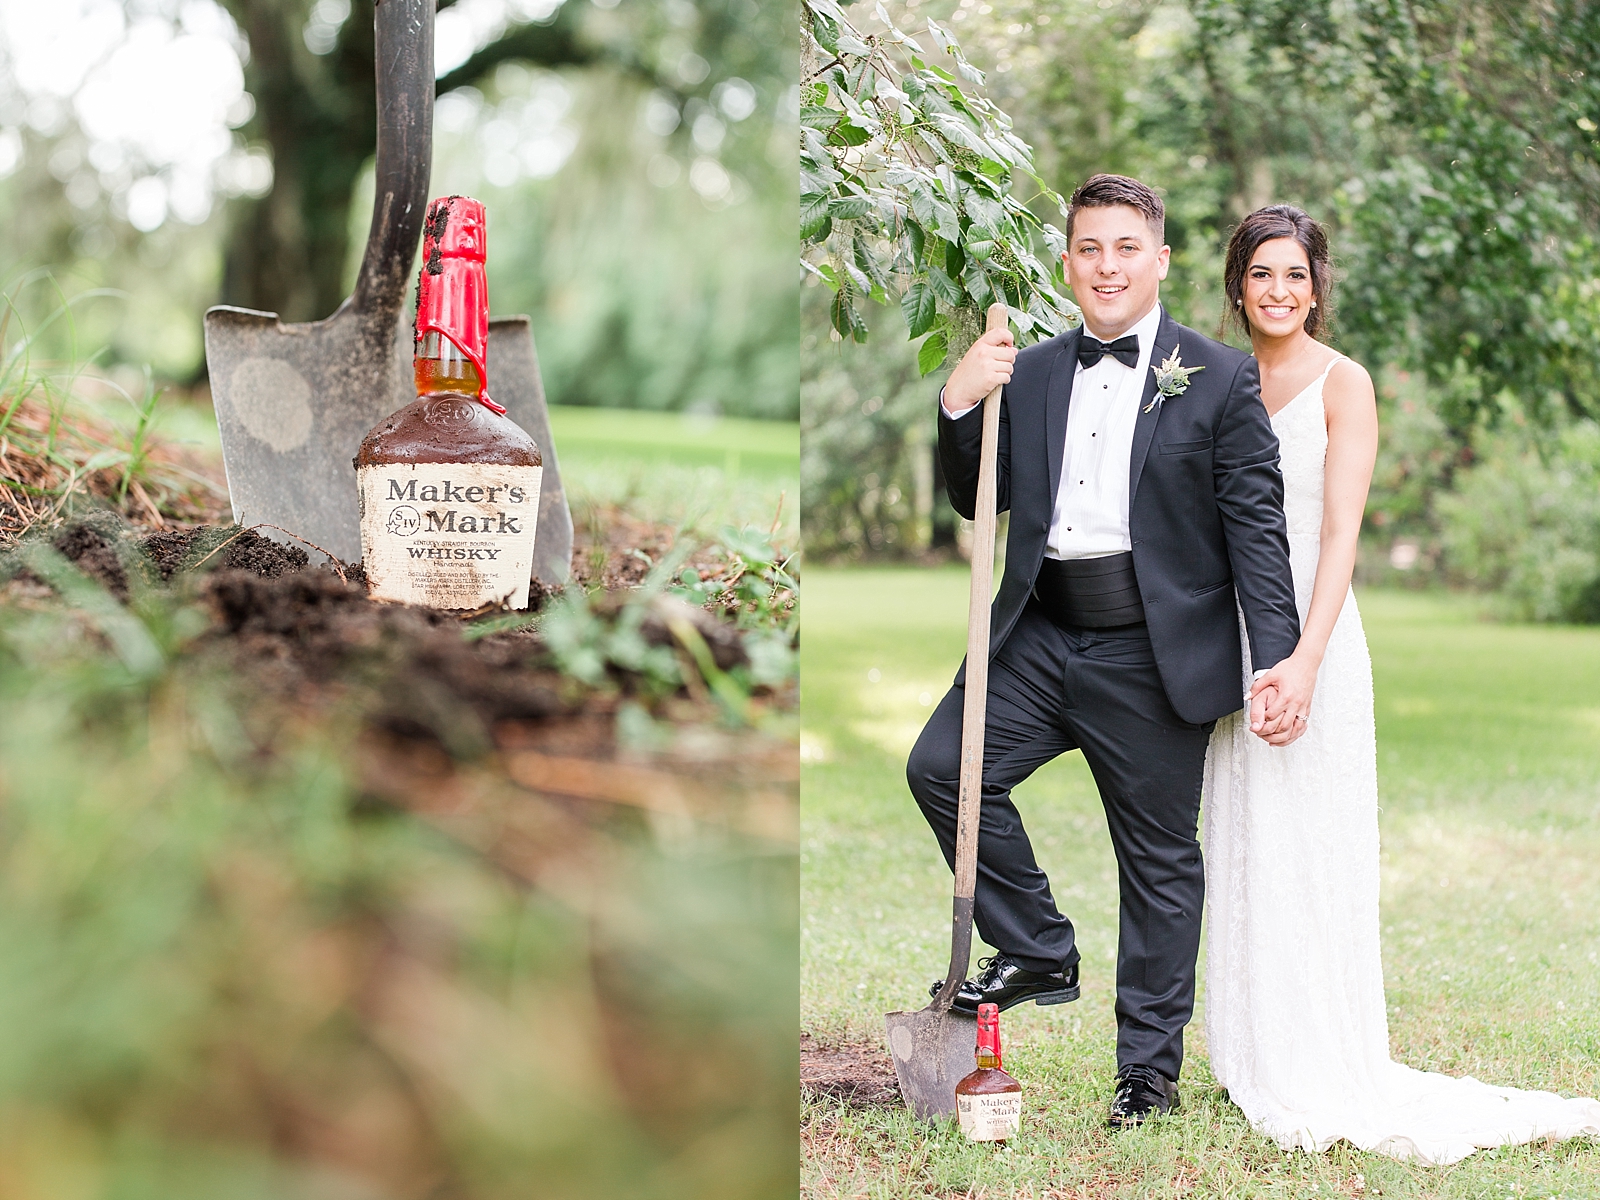 Magnolia Plantation Wedding Makers Mark with Shovel and Bride and Groom Photos